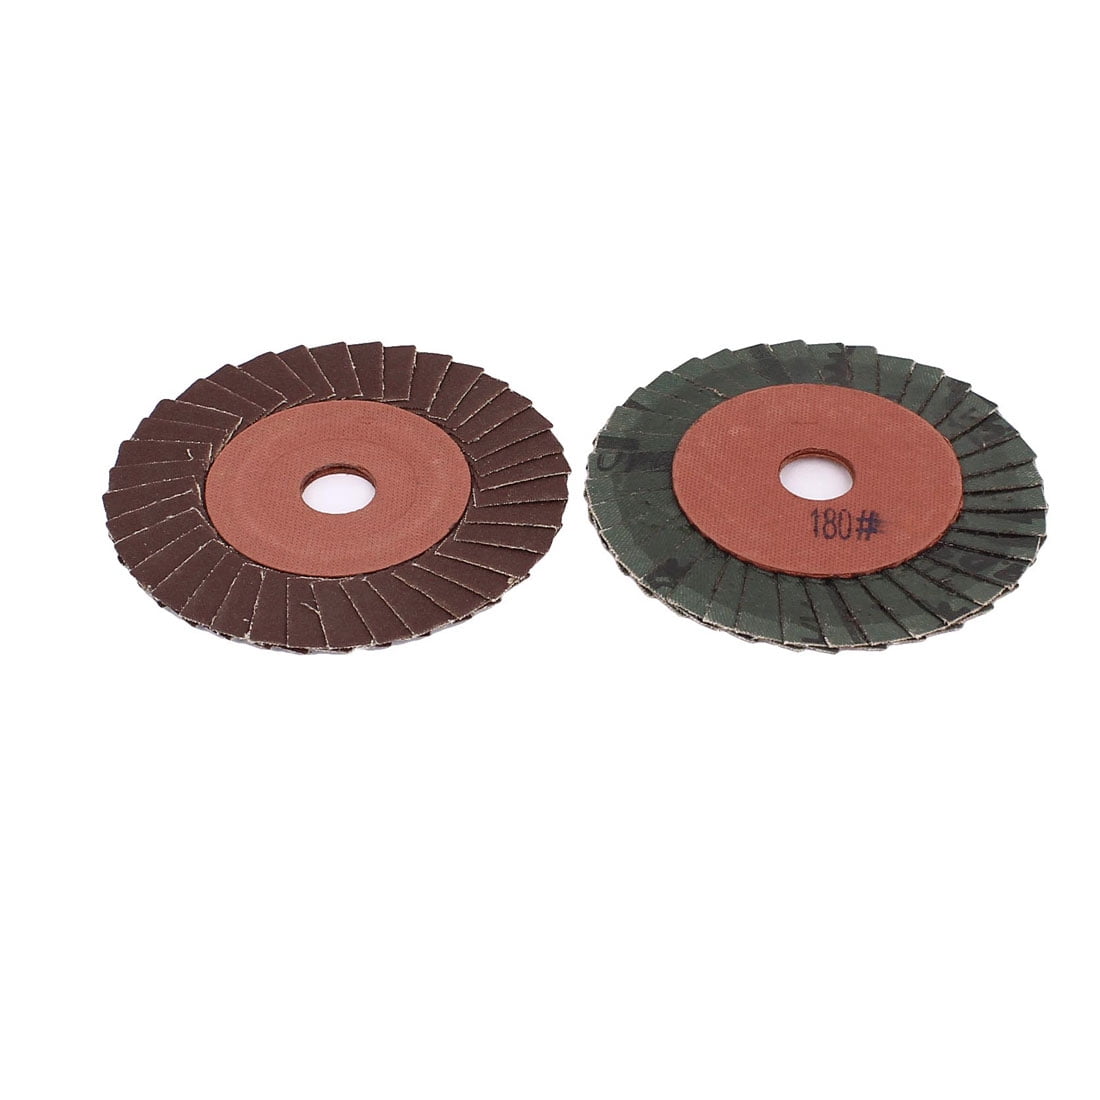 KingTool 27pcs Angle Grinder Wheel Set 2pcs Flap Discs with 4-1/2 Diameter and 7/8 Arbor for Steel and Stainless Cutting Grinding 5pcs Grinding Wheel Grinder Disc Set Includes 20pcs Cutting Wheel 